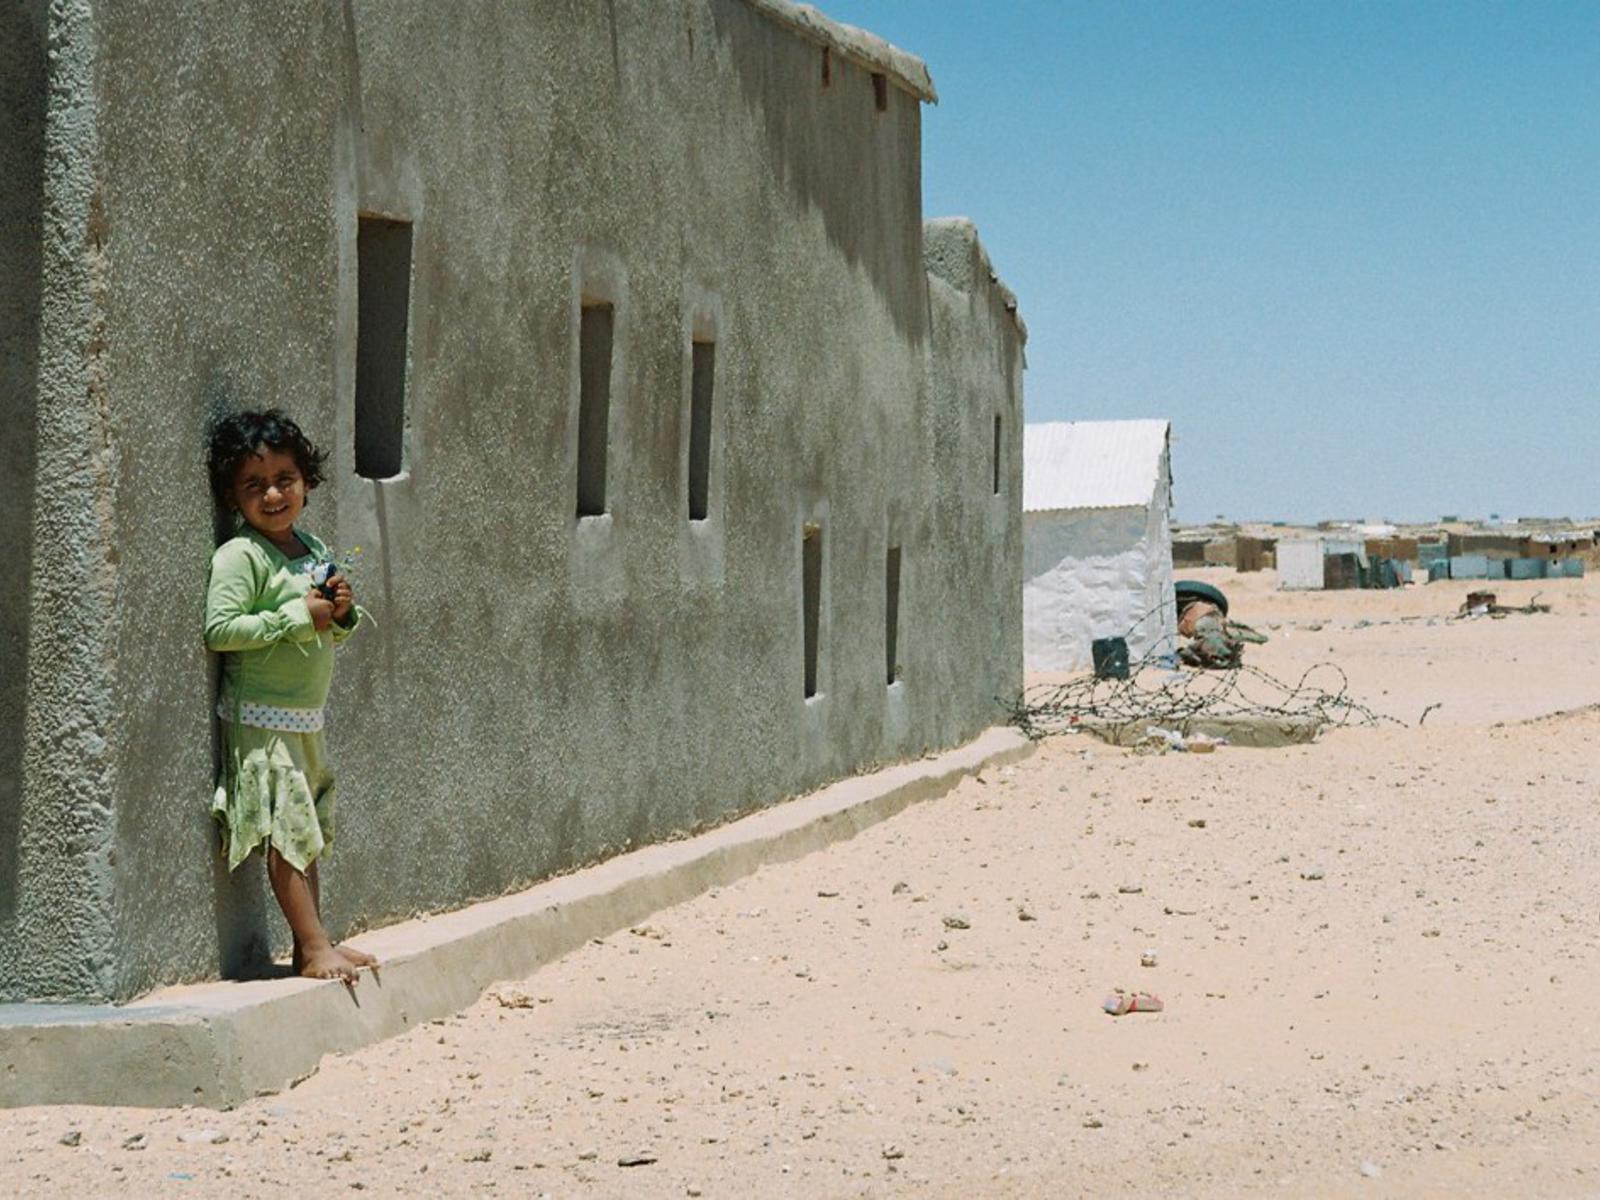 A Saharawi child stands outside her home in her desert village.